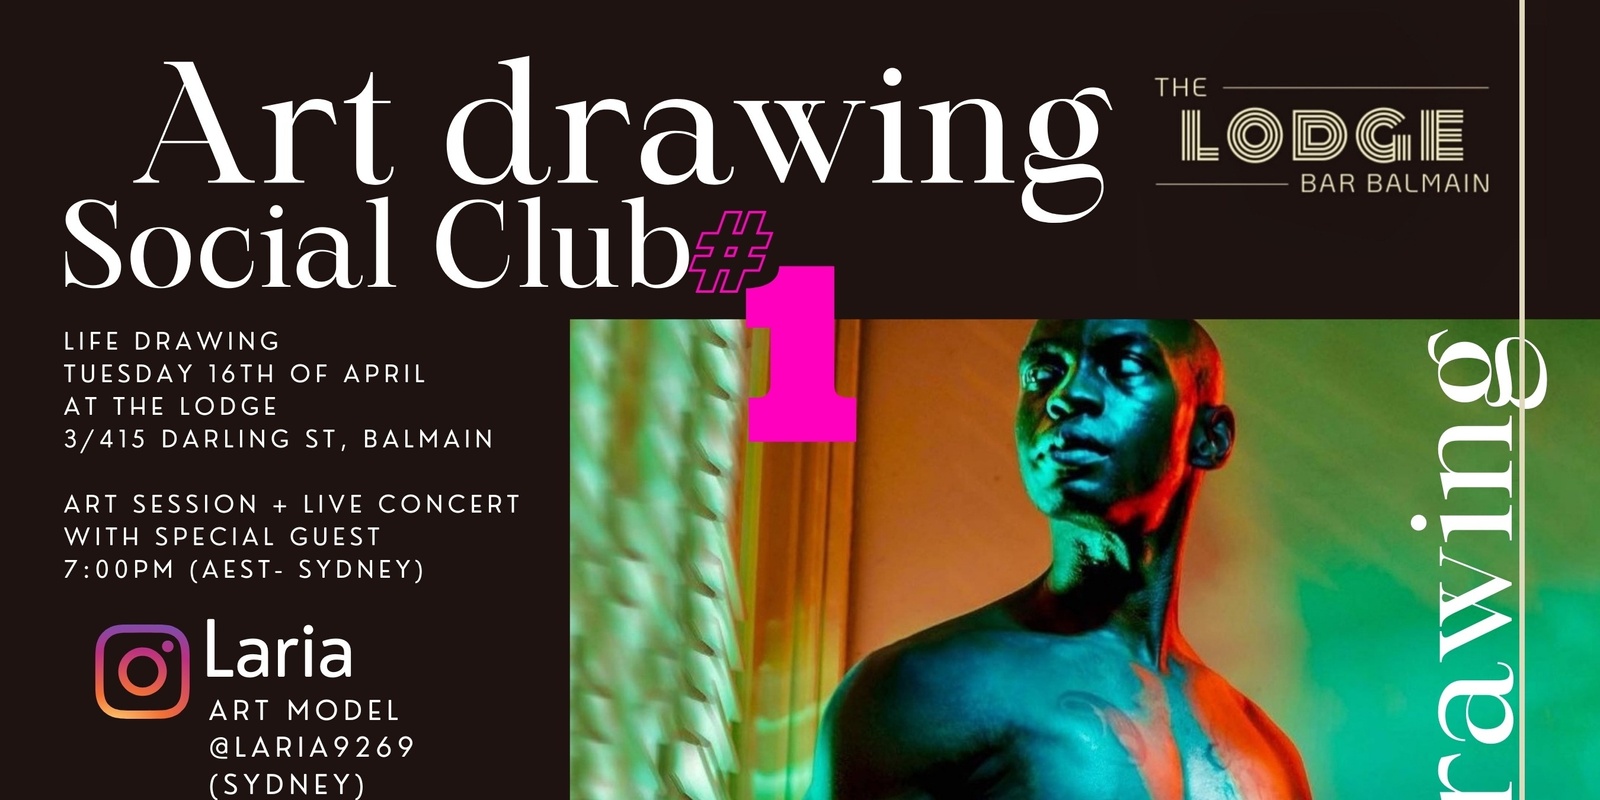 Banner image for Art Drawing Live Music Social Club_the Lodge #1